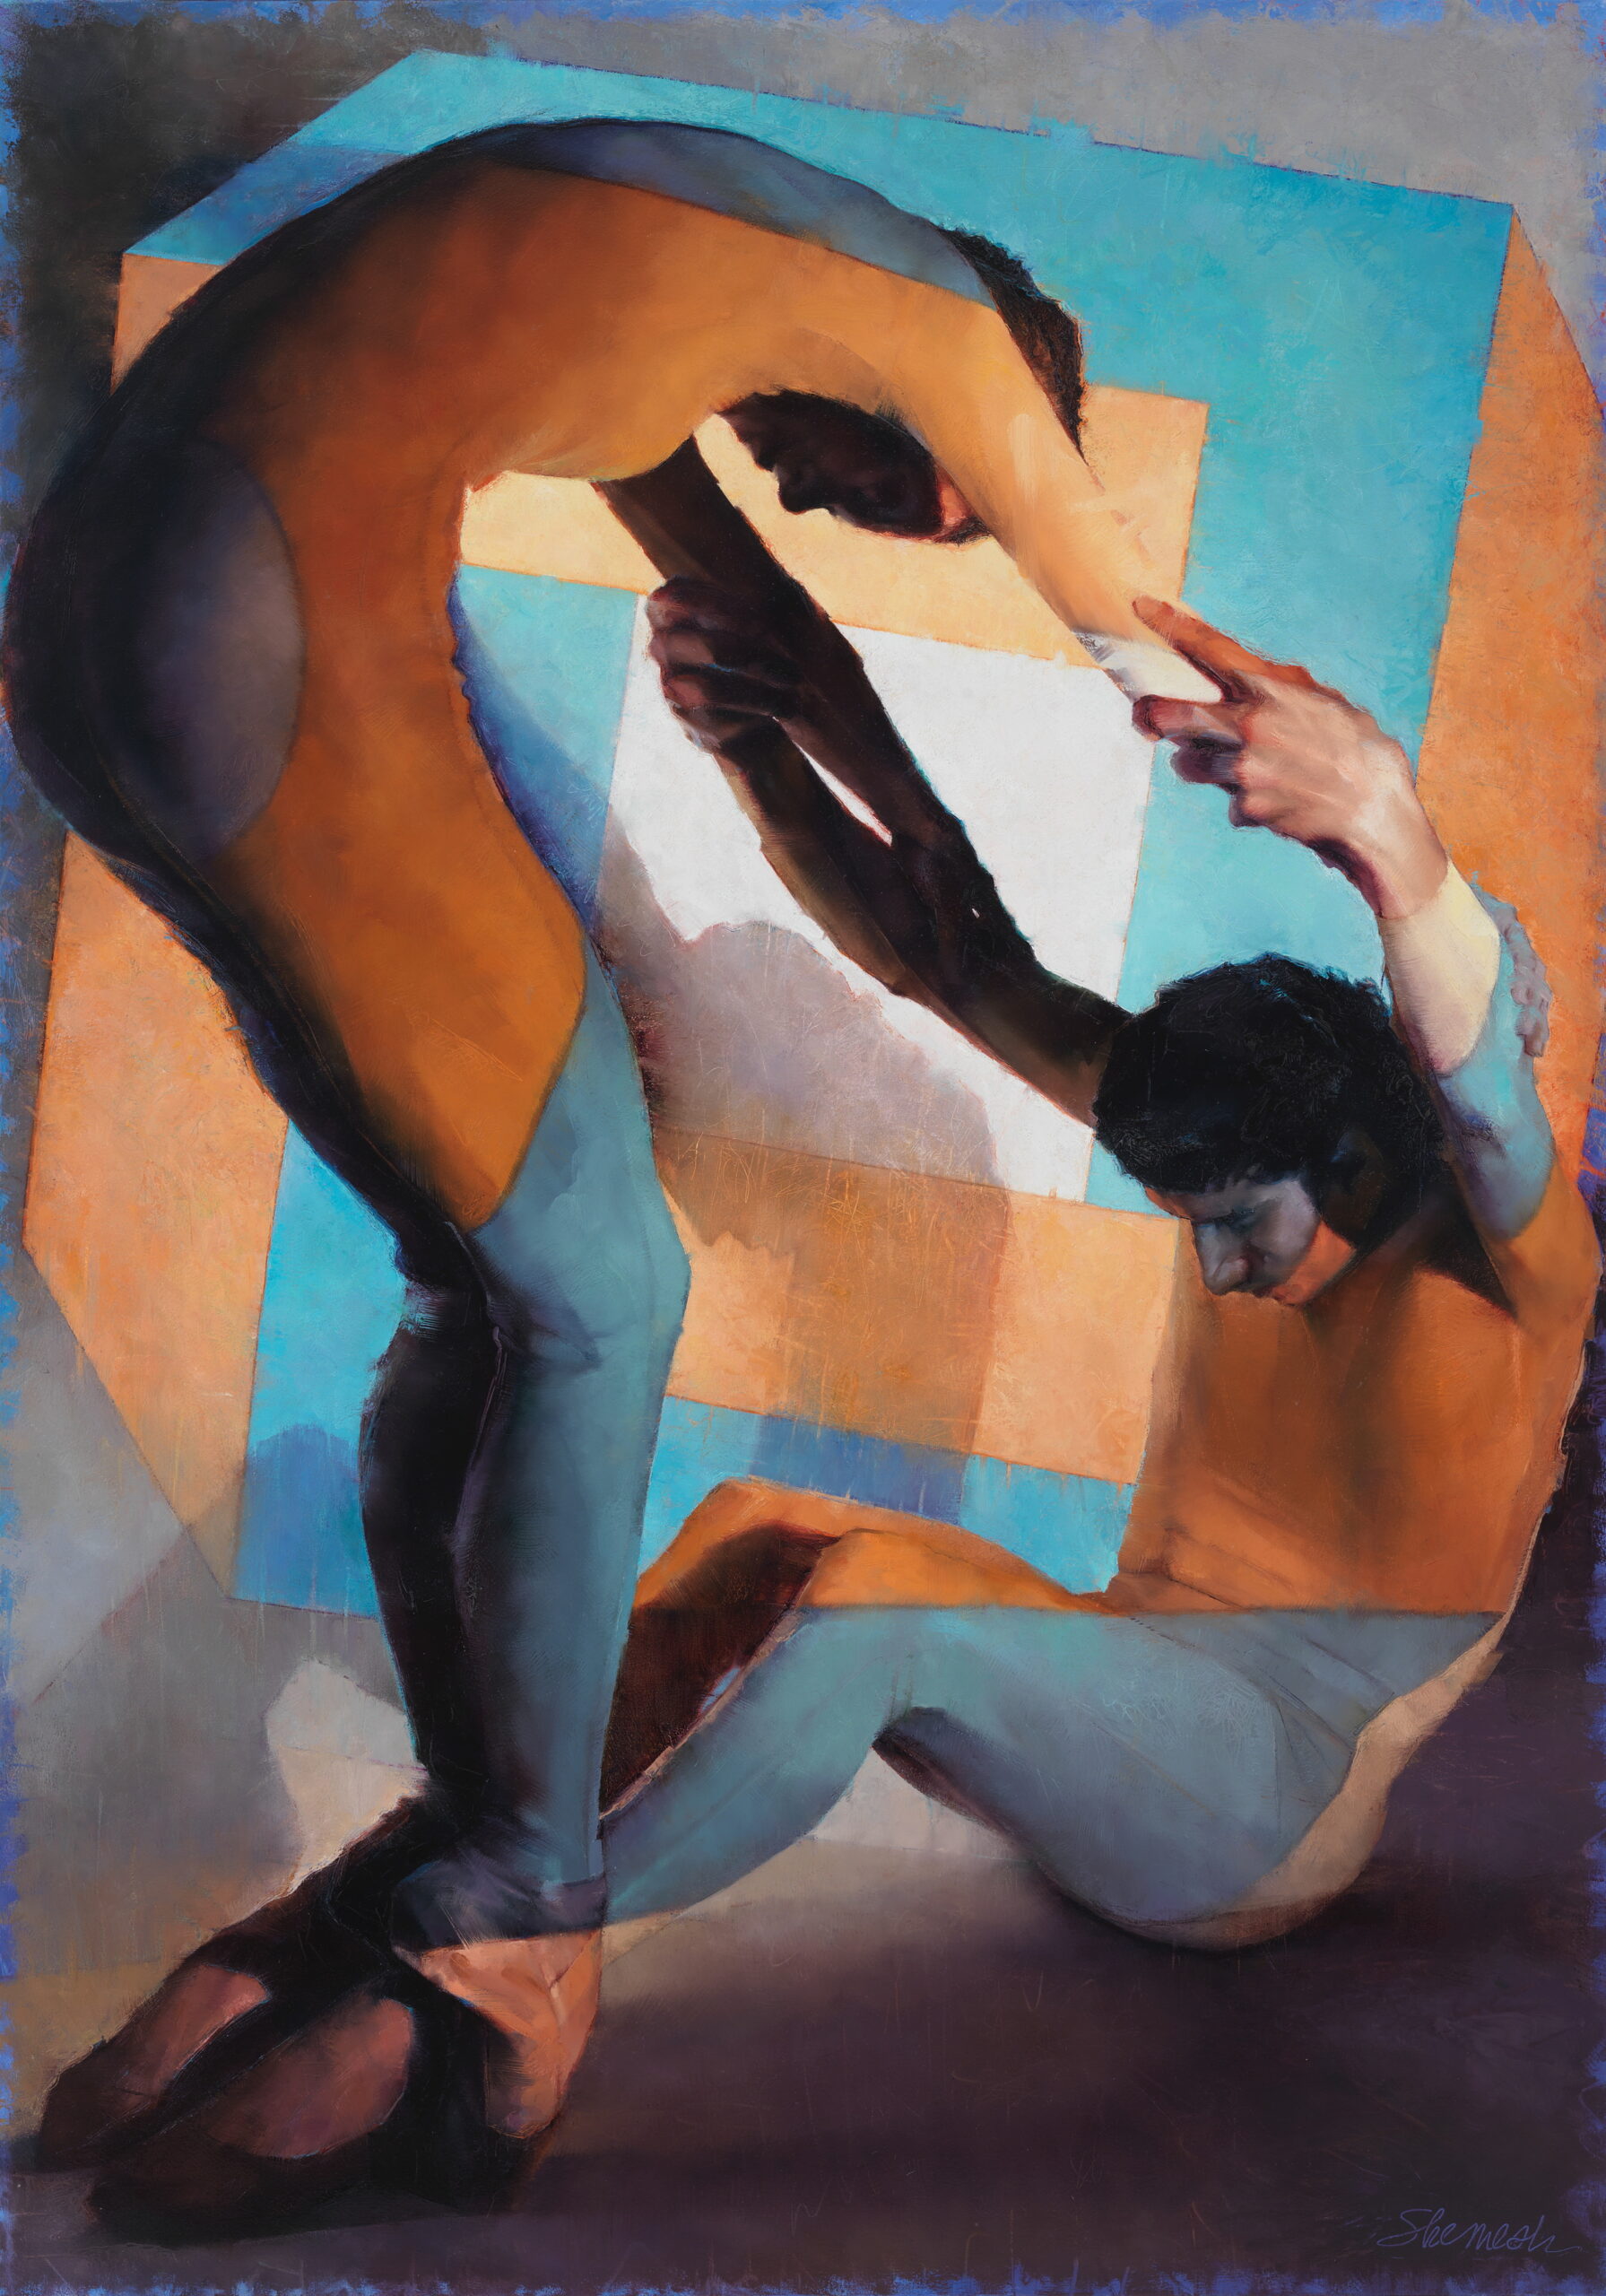 
							

									Lorraine Shemesh									Around the Bend 2023									oil on canvas<br />
62 x 43 1/2 inches									


							